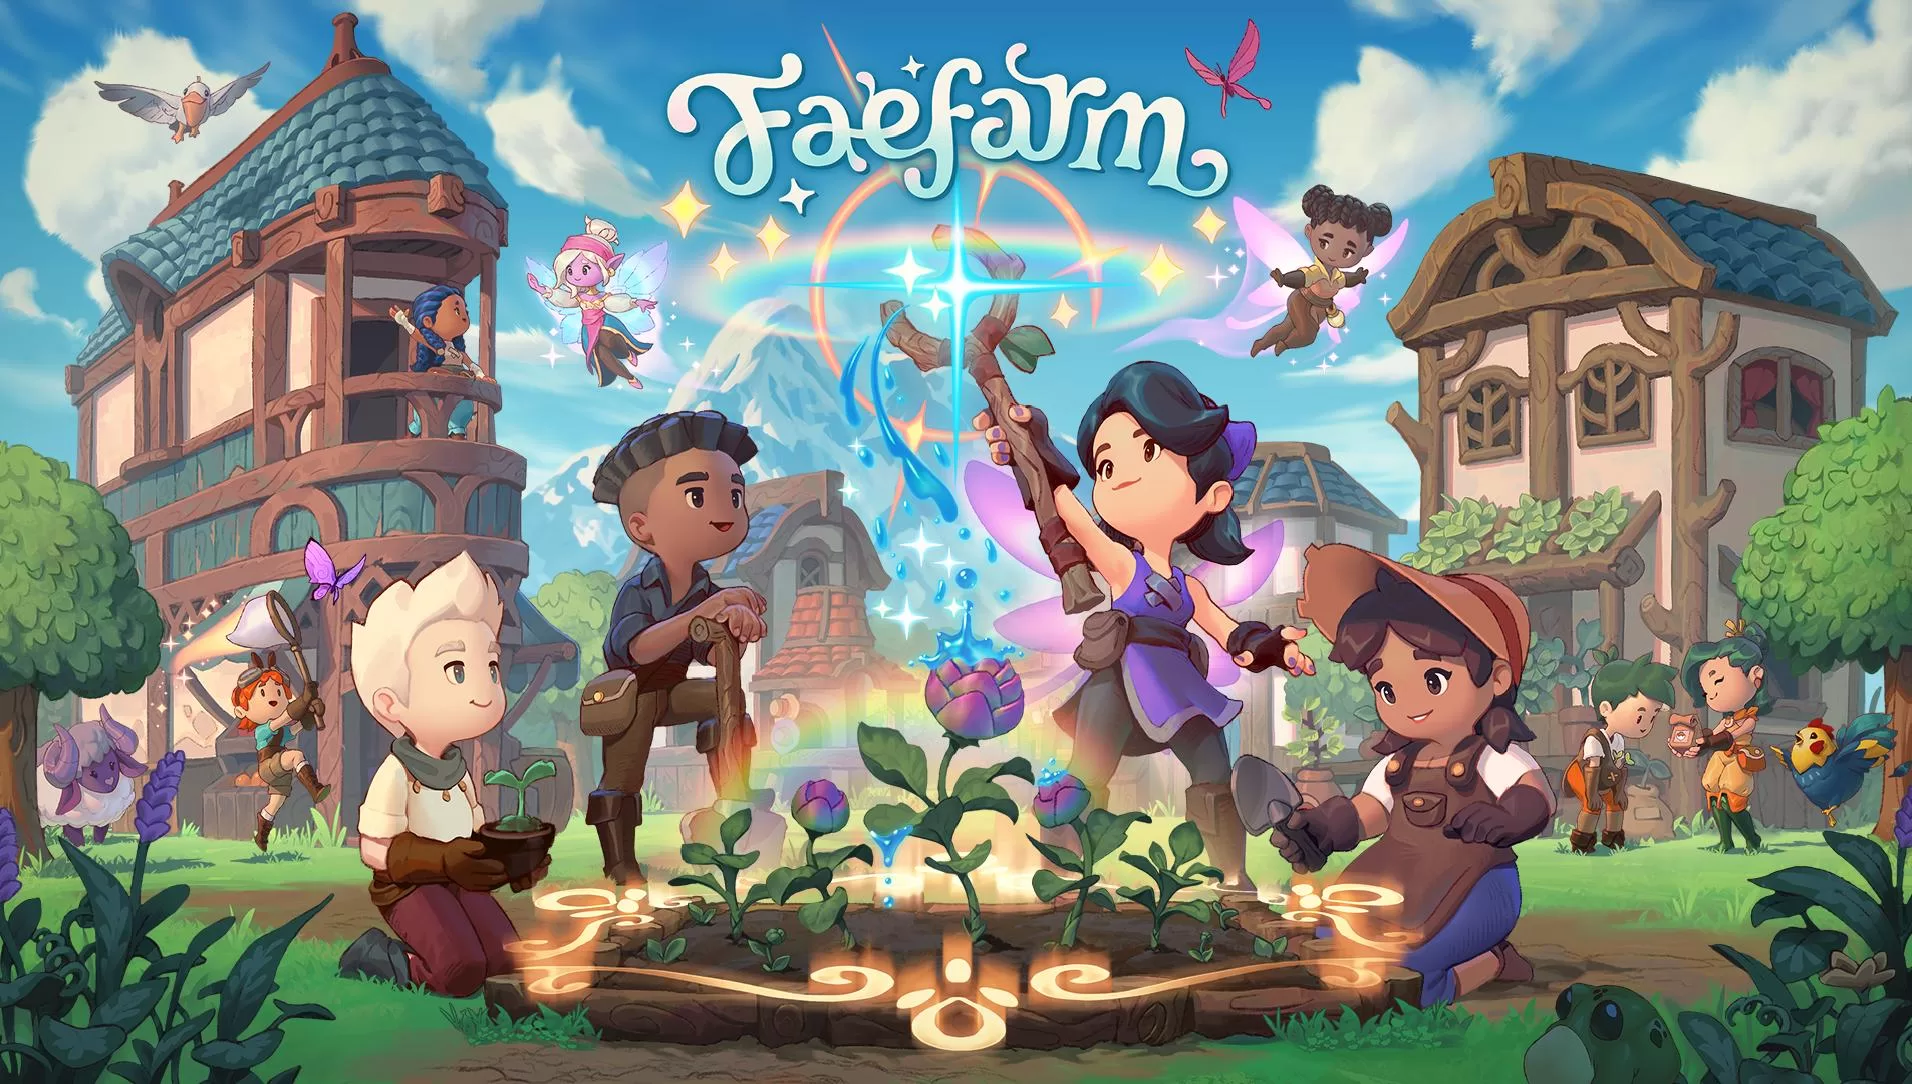 Fae Farm: A Whimsical World Awaits in This Upcoming Game